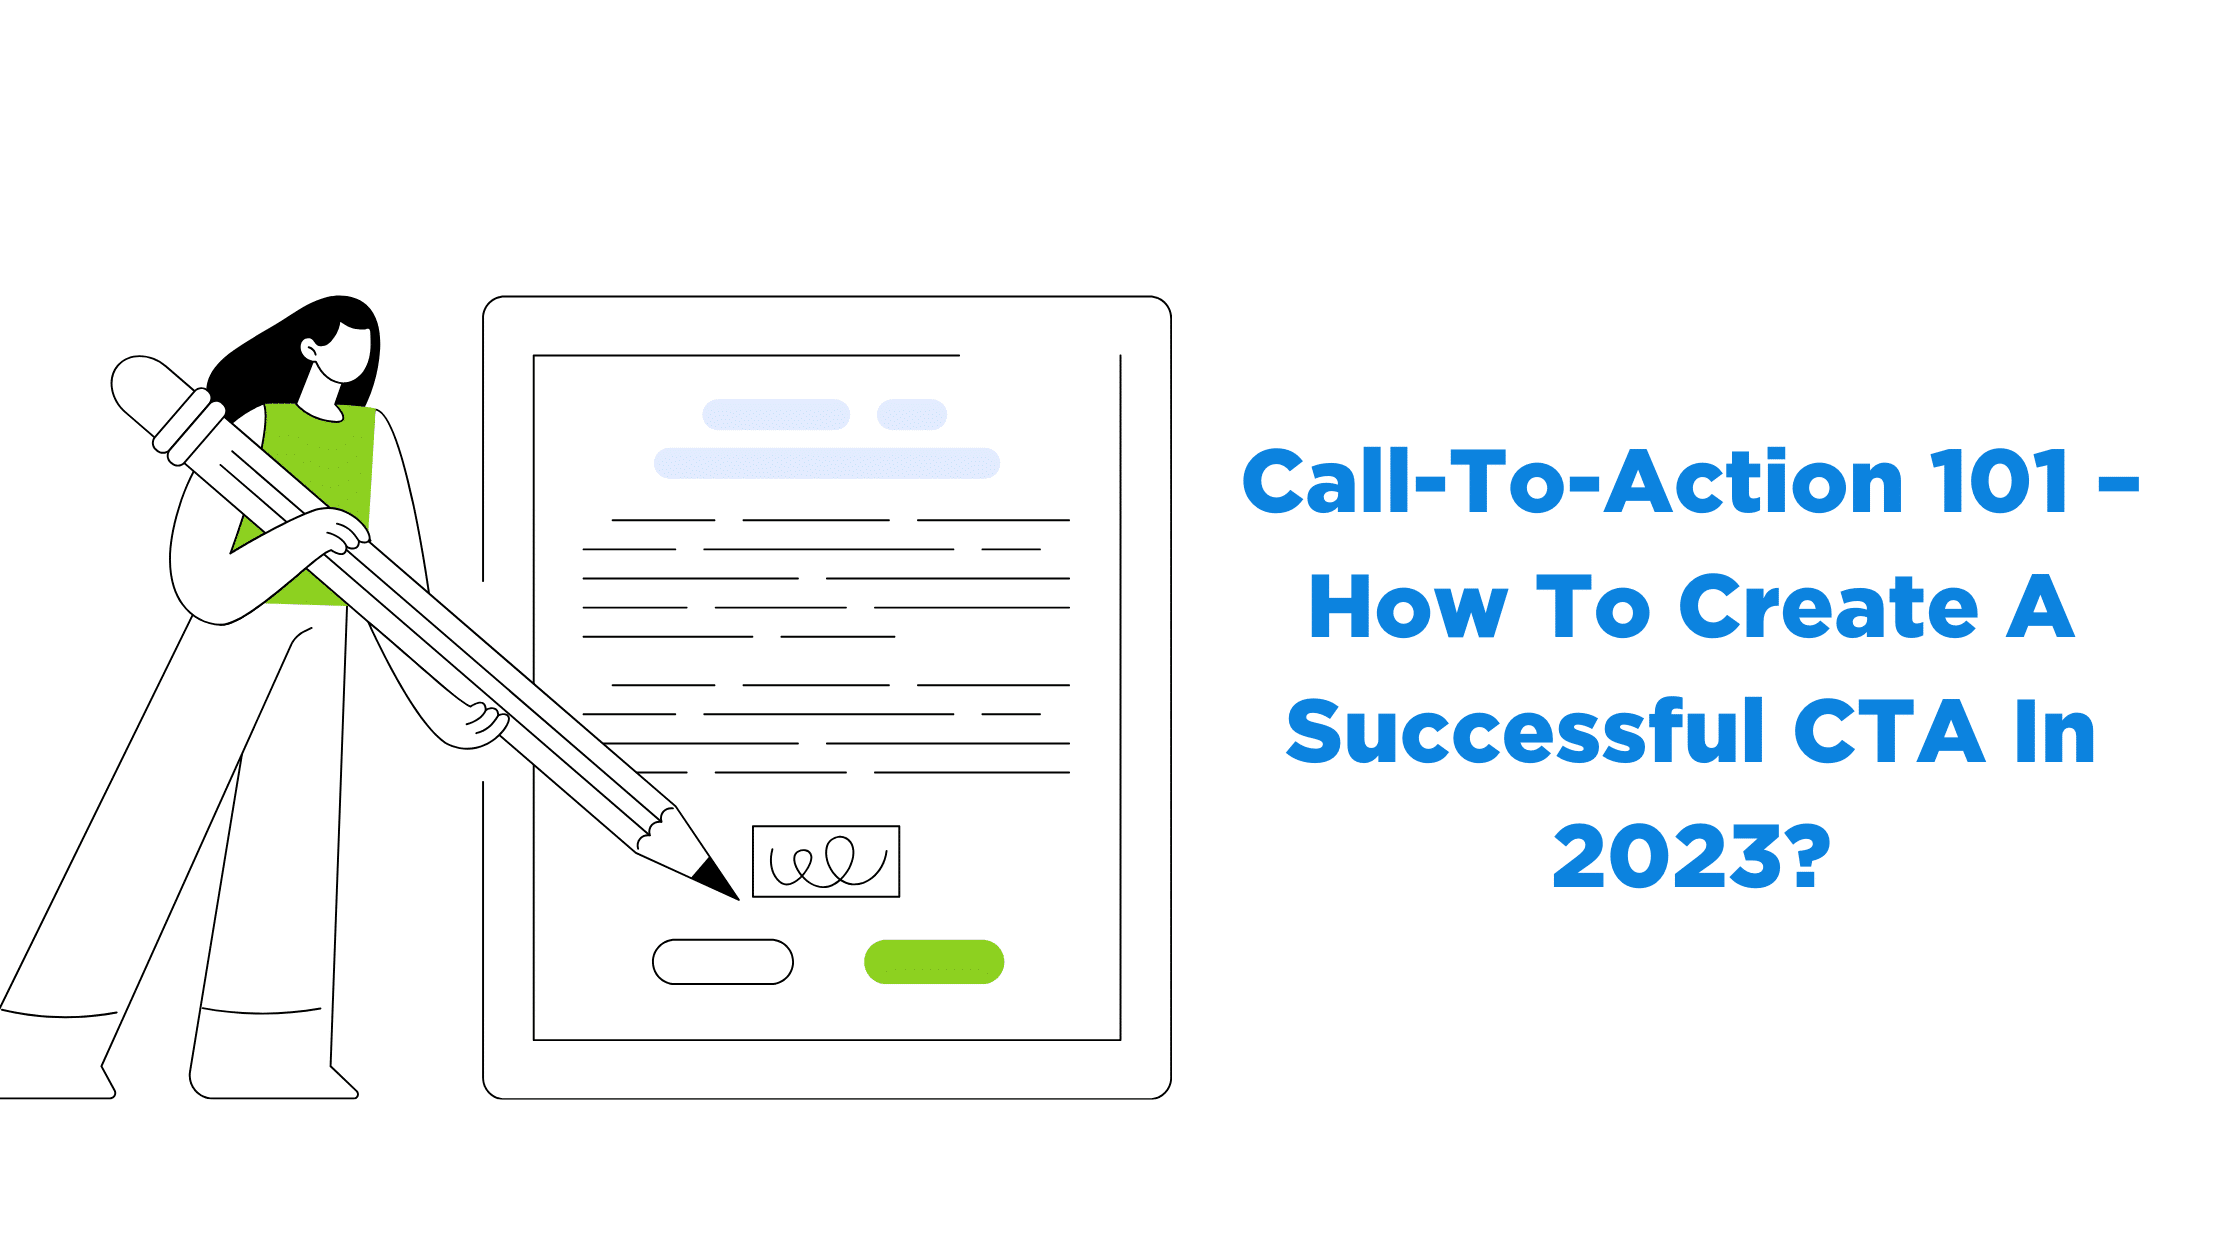 Call-To-Action 101 – How To Create A Successful CTA In 2023?